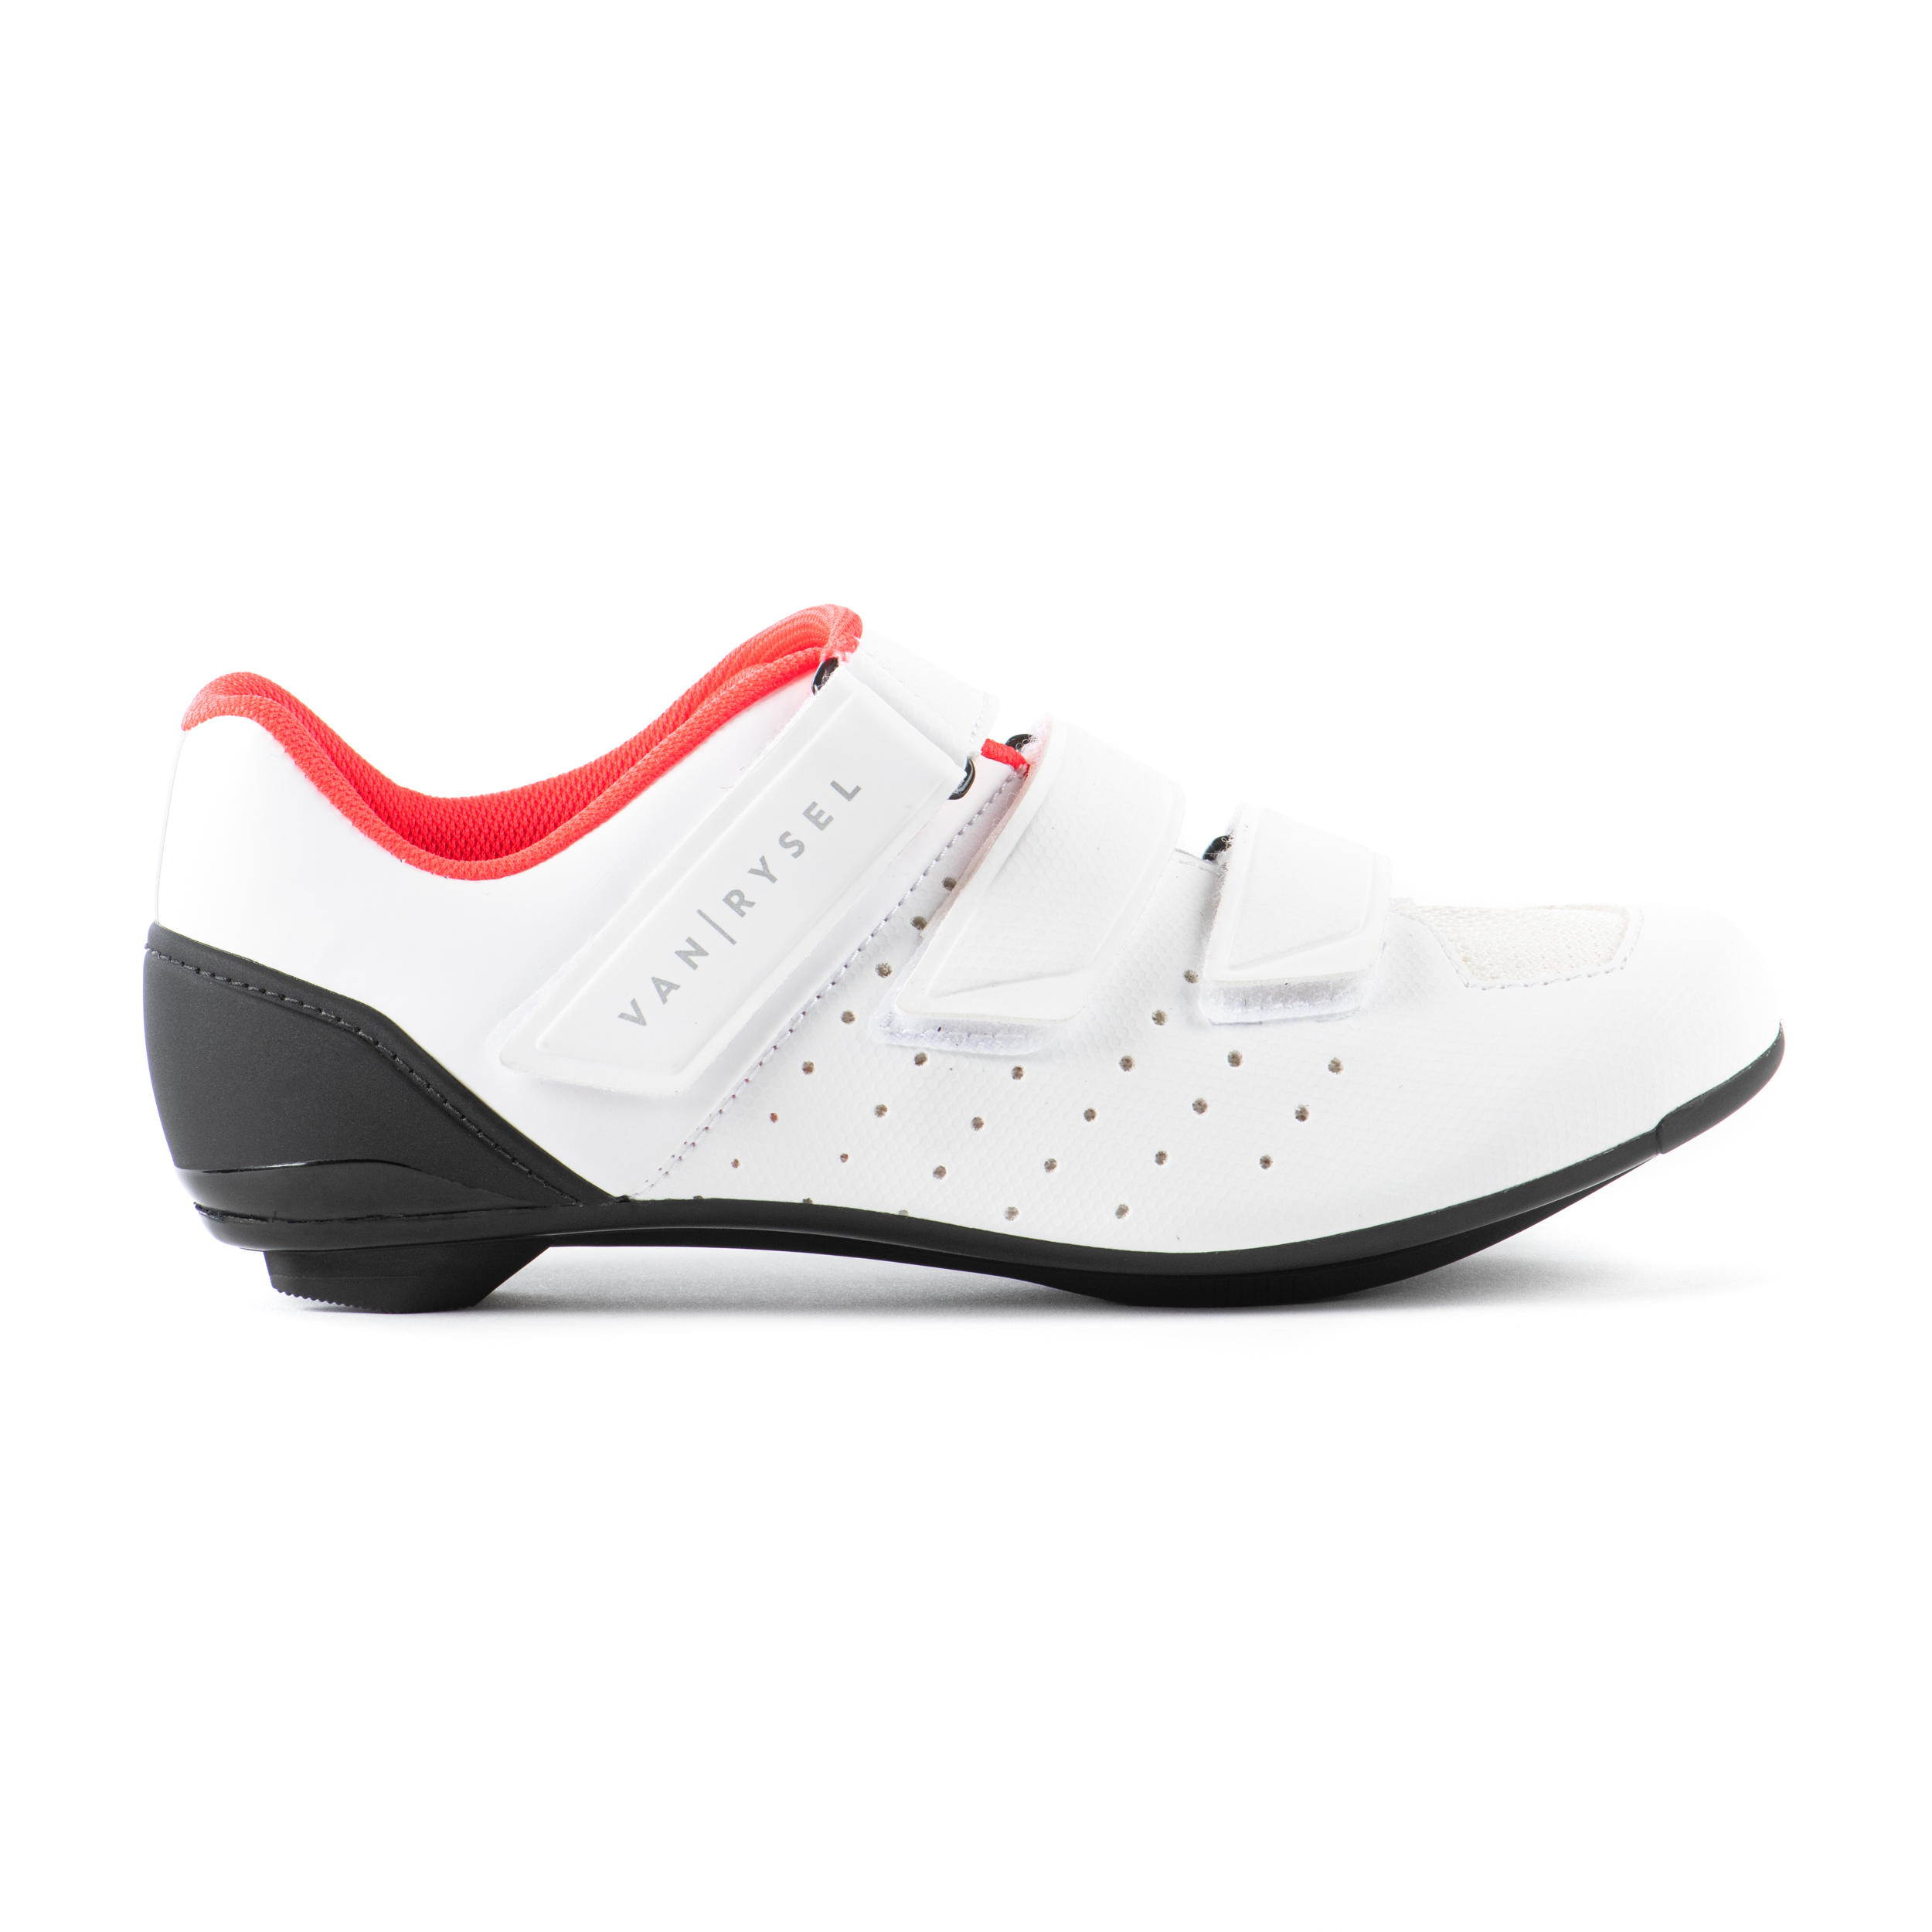 RCR500 Women's Road Cycling Shoes - White 3/4